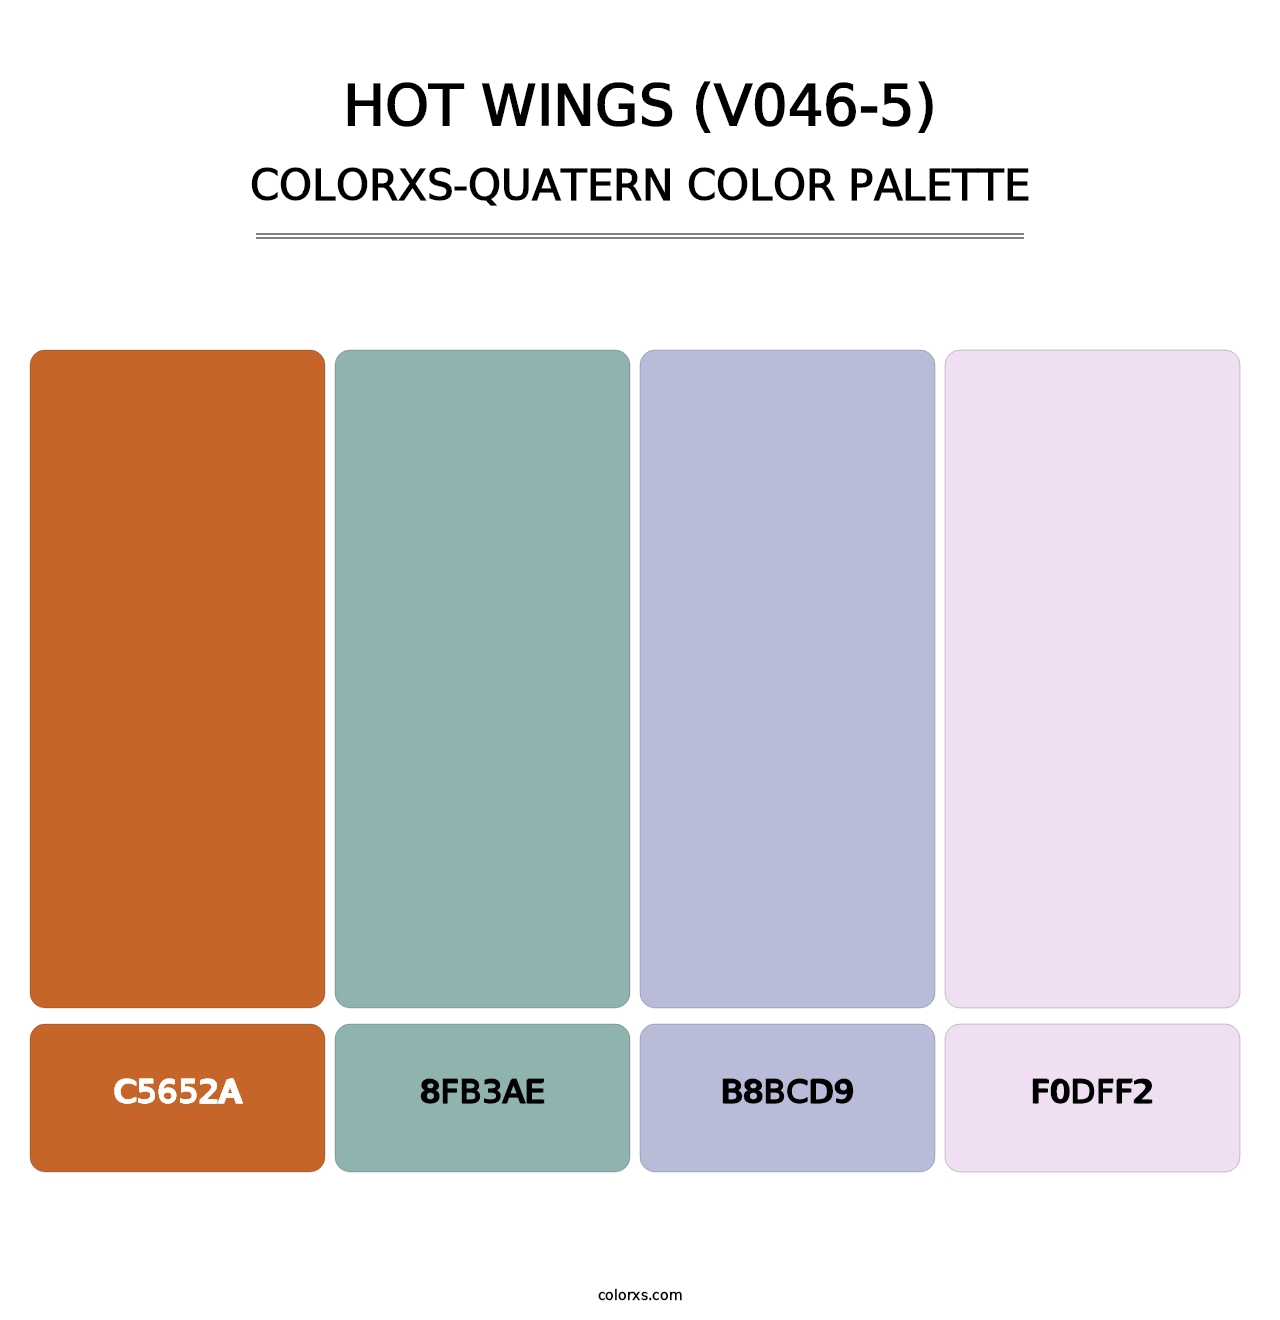 Hot Wings (V046-5) - Colorxs Quatern Palette